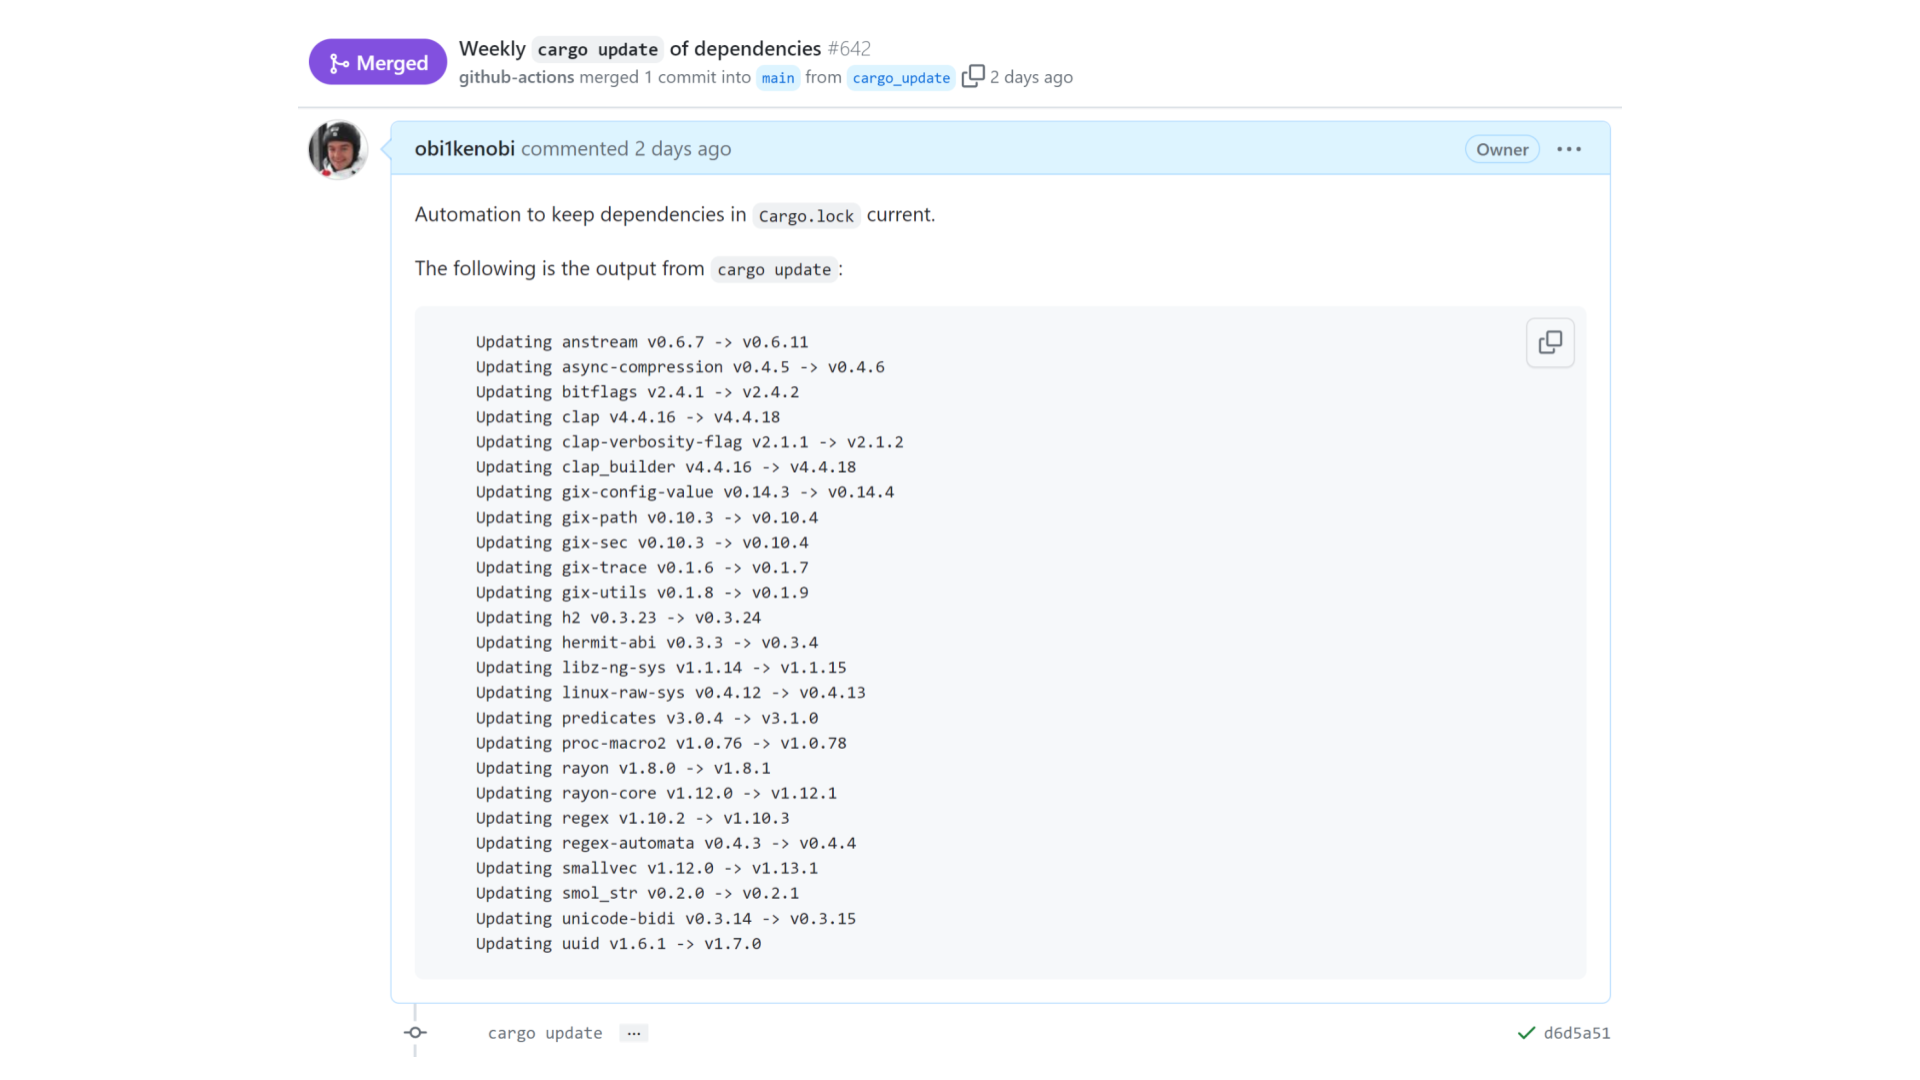 GitHub pull request with description: "Automation to keep dependencies in Cargo.lock current. The following is the output from "cargo update", followed by 25 libraries being bumped to new non-major versions. The pull request has passed tests and is merged.